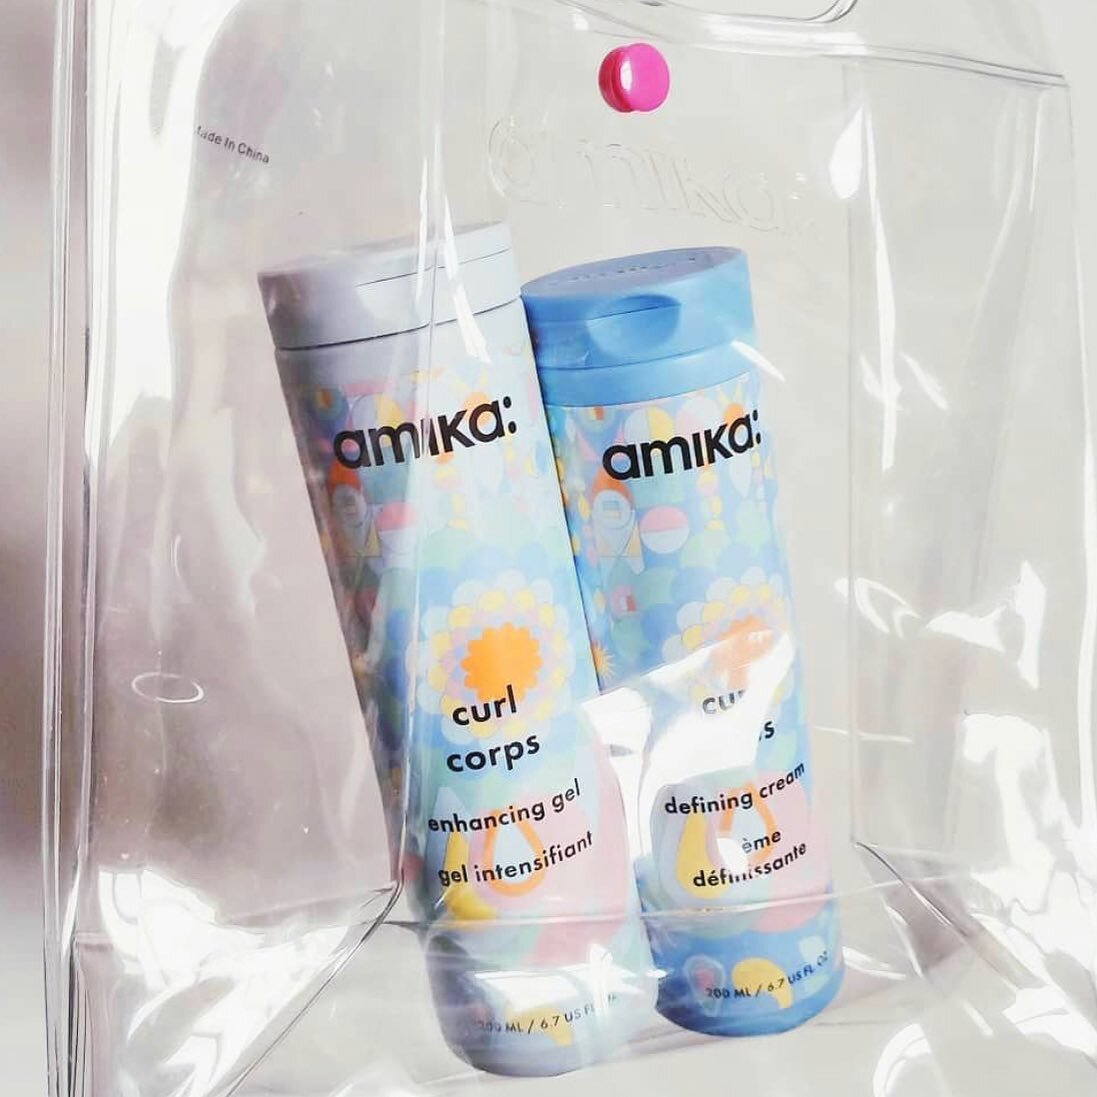 @amika curl corps enhancing gel + defining cream 💙

Available at Sephora.com and professional salons nationwide!

#amika #amikahairproducts #allhairiswelcome #clientlove 

photo by @diaryofabeautylover